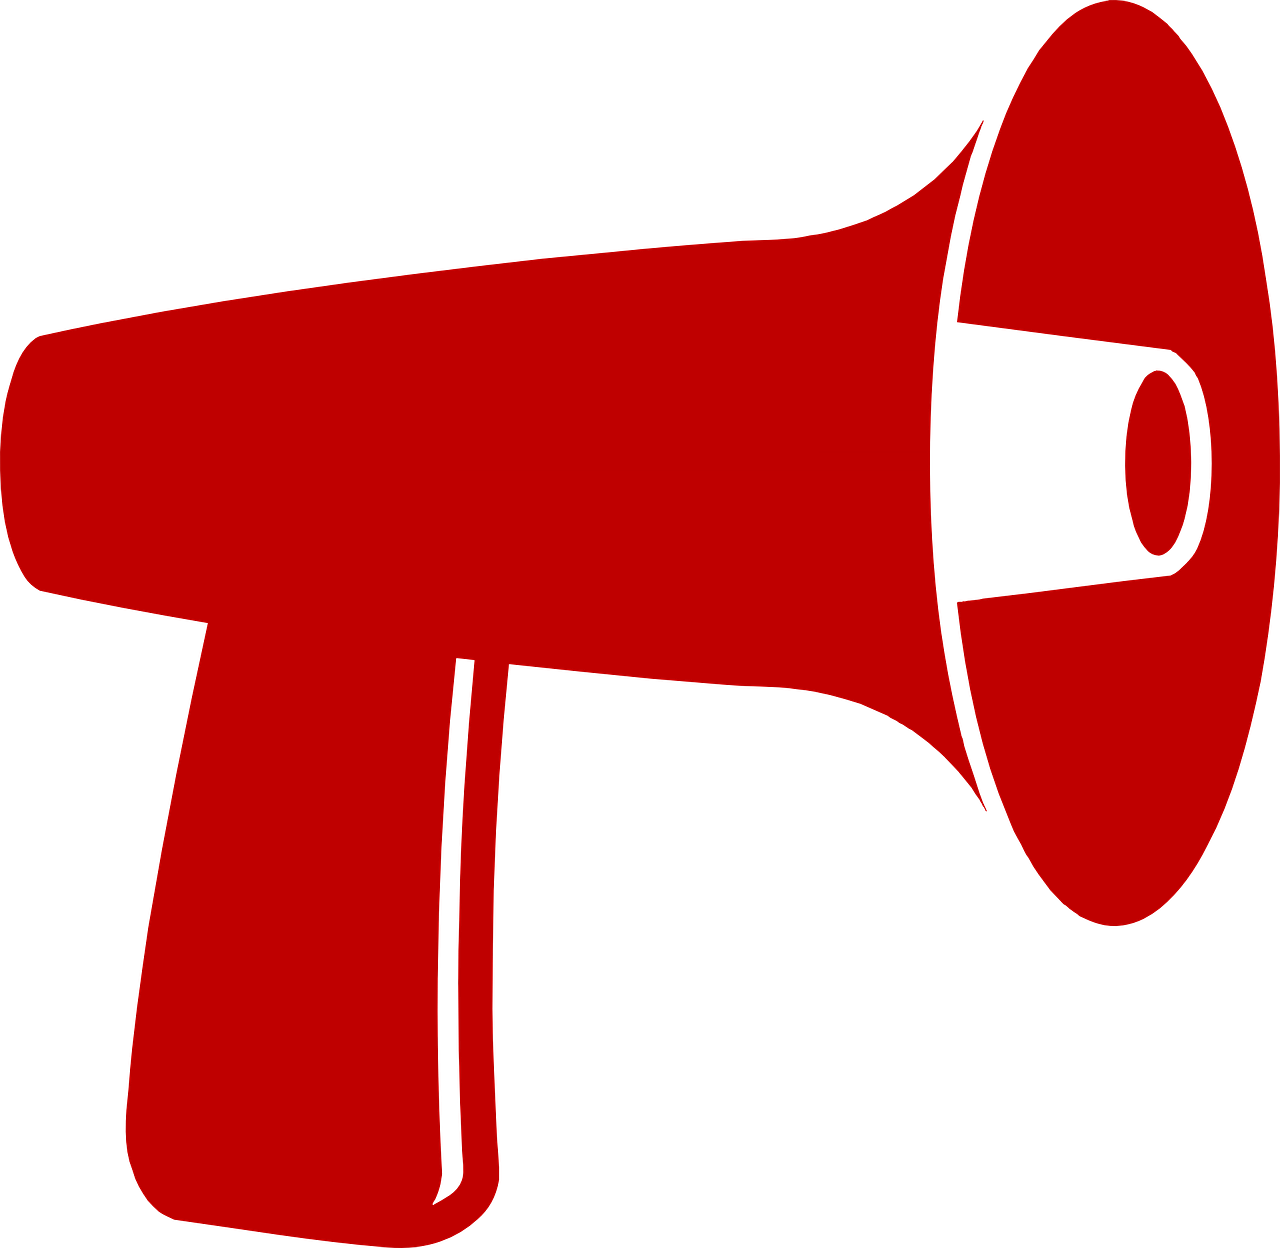 Announcements nar anon of. Megaphone clipart say something